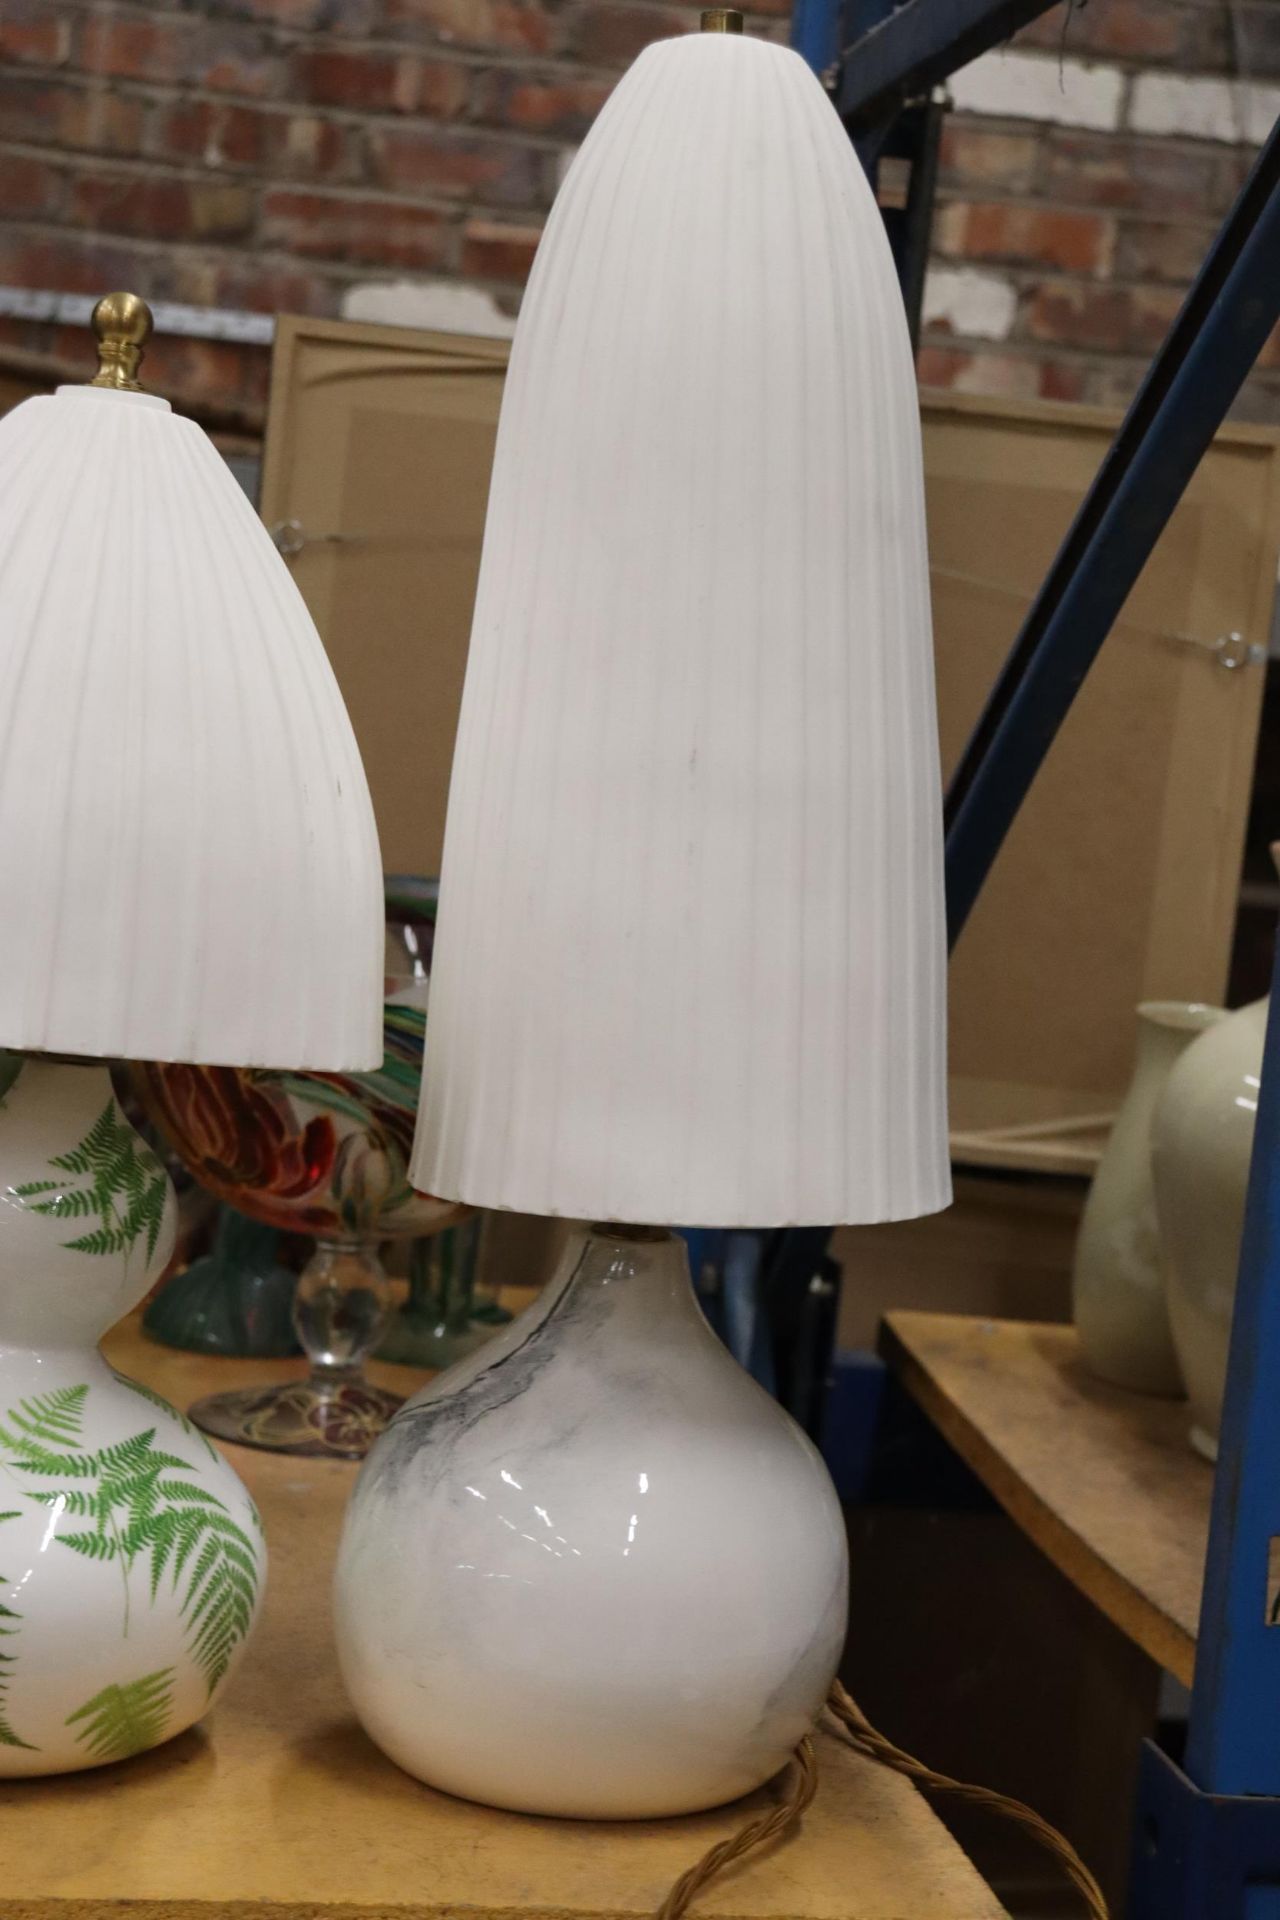 TWO CERAMIC TABLE LAMPS WITH CERAMIC SHADES - Image 3 of 7